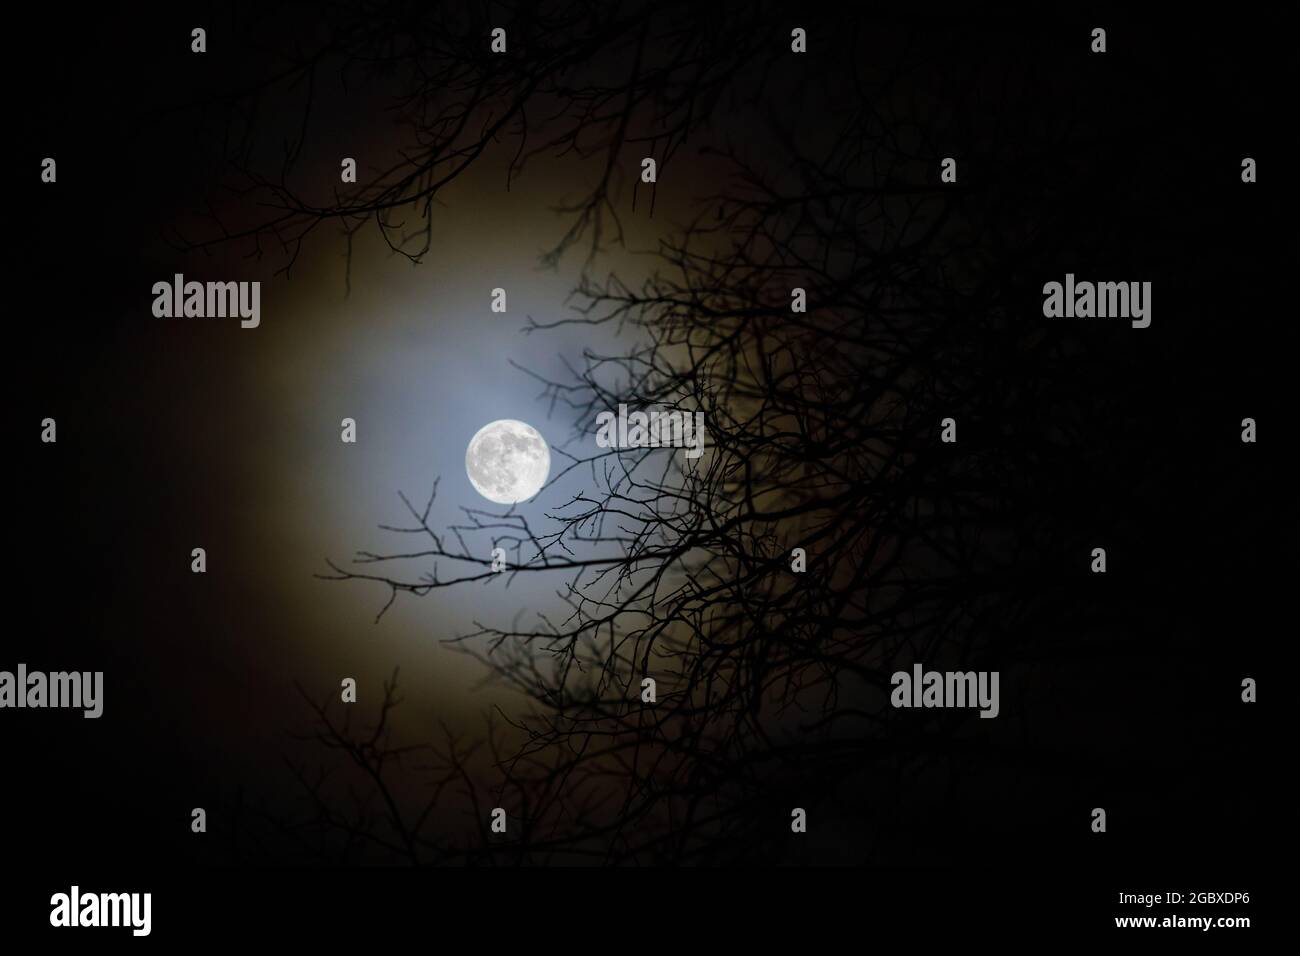 Mysterious landscape, full moon with bright halo behind dark tree branches, spooky night Stock Photo